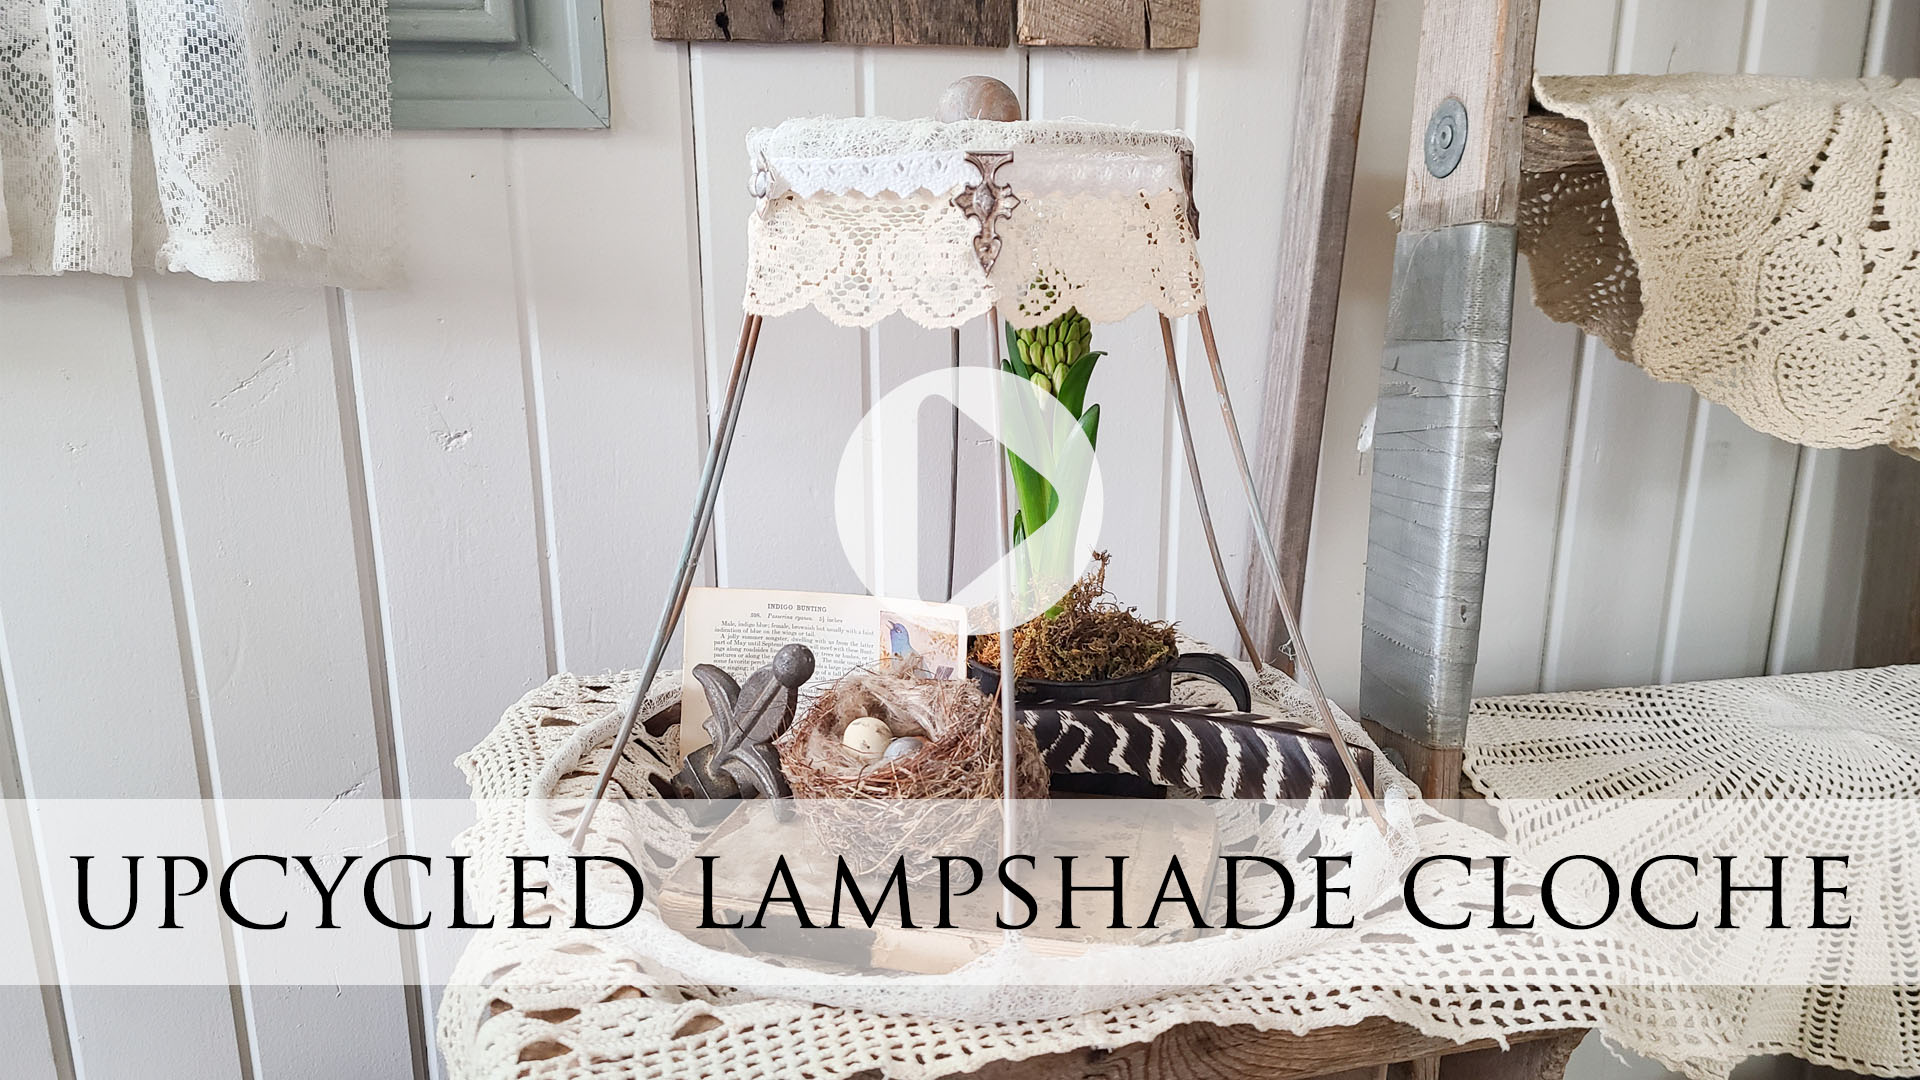 DIY Video Tutorial for Upcycled Lampshade Cloche for Farmhouse Decor by Larissa of Prodigal Pieces | prodigalpieces.com #prodigalpieces #farmhouse #diy #upcycled